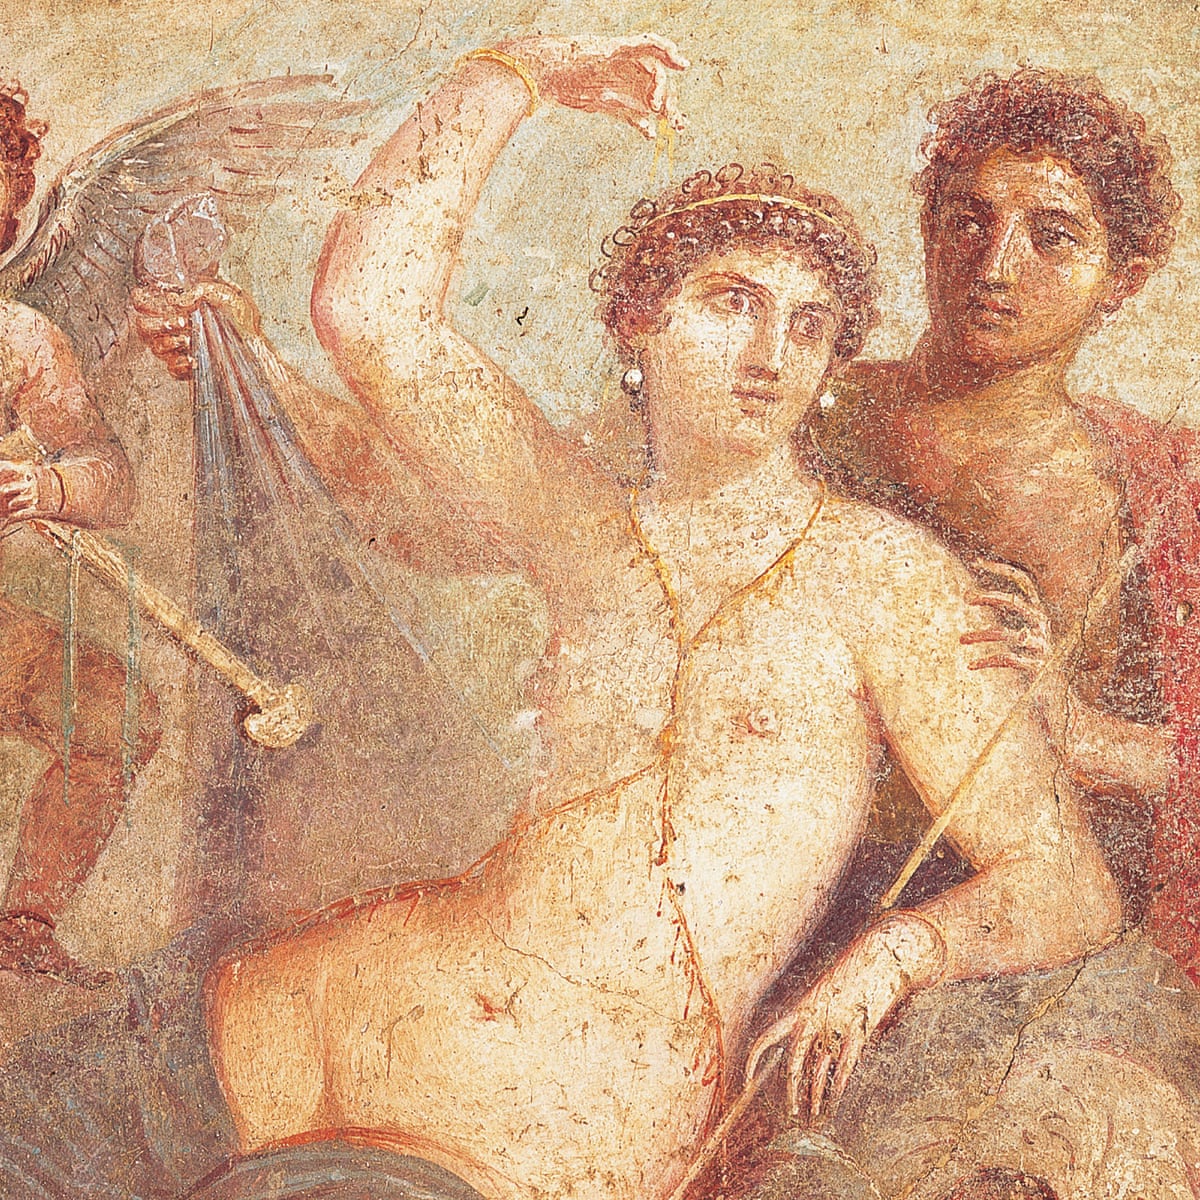 investering Definition eksplicit Pandora's Jar by Natalie Haynes review – rescuing women in Greek myths |  Classics | The Guardian